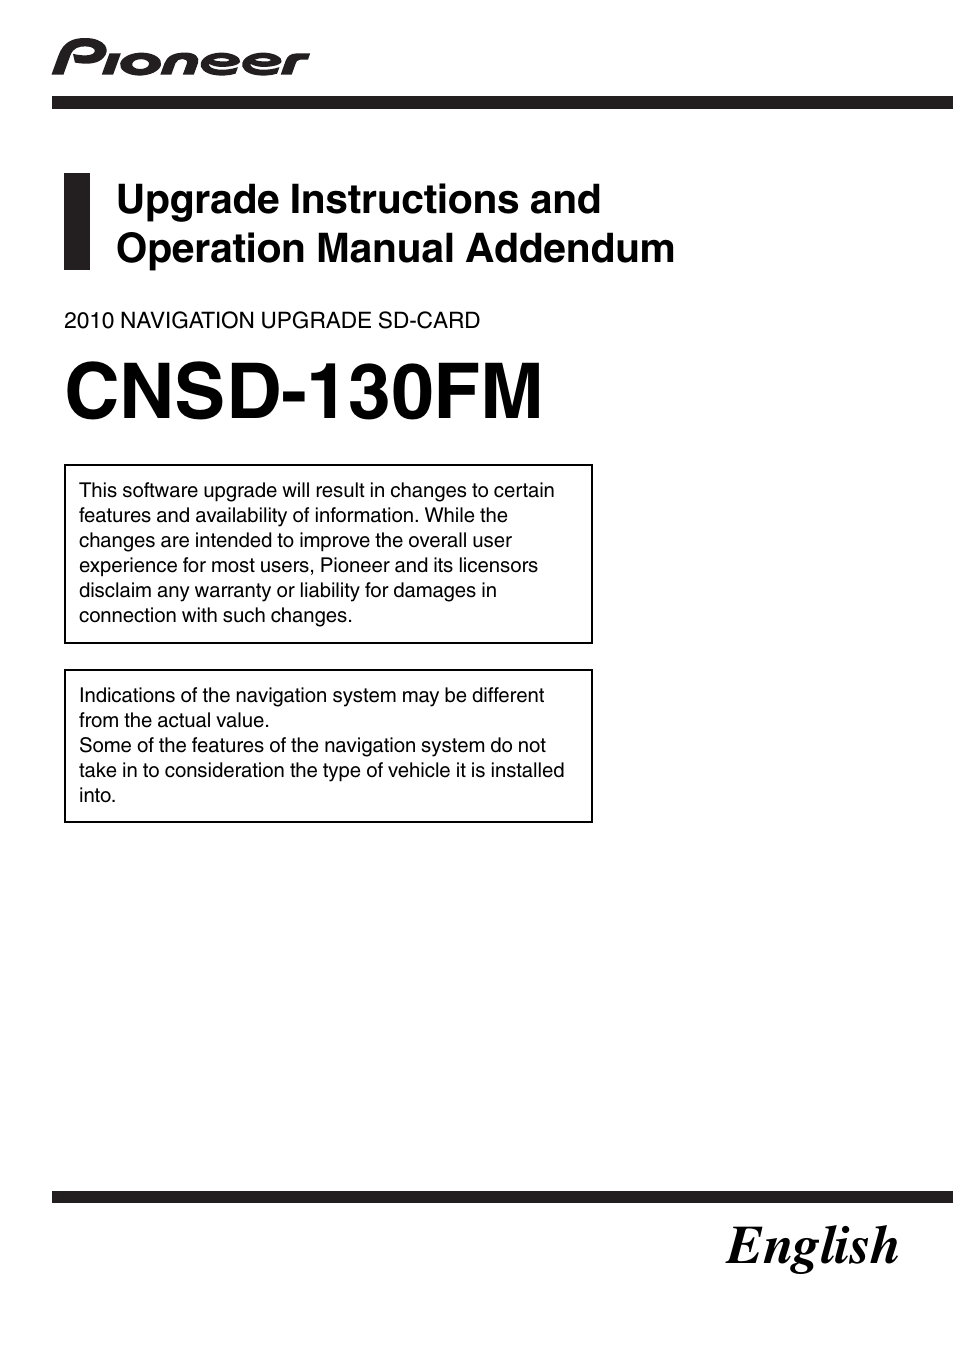 Pioneer 2010 NAVIGATION UPGRADE SD-CARD CNSD-130FM User Manual | 144 pages